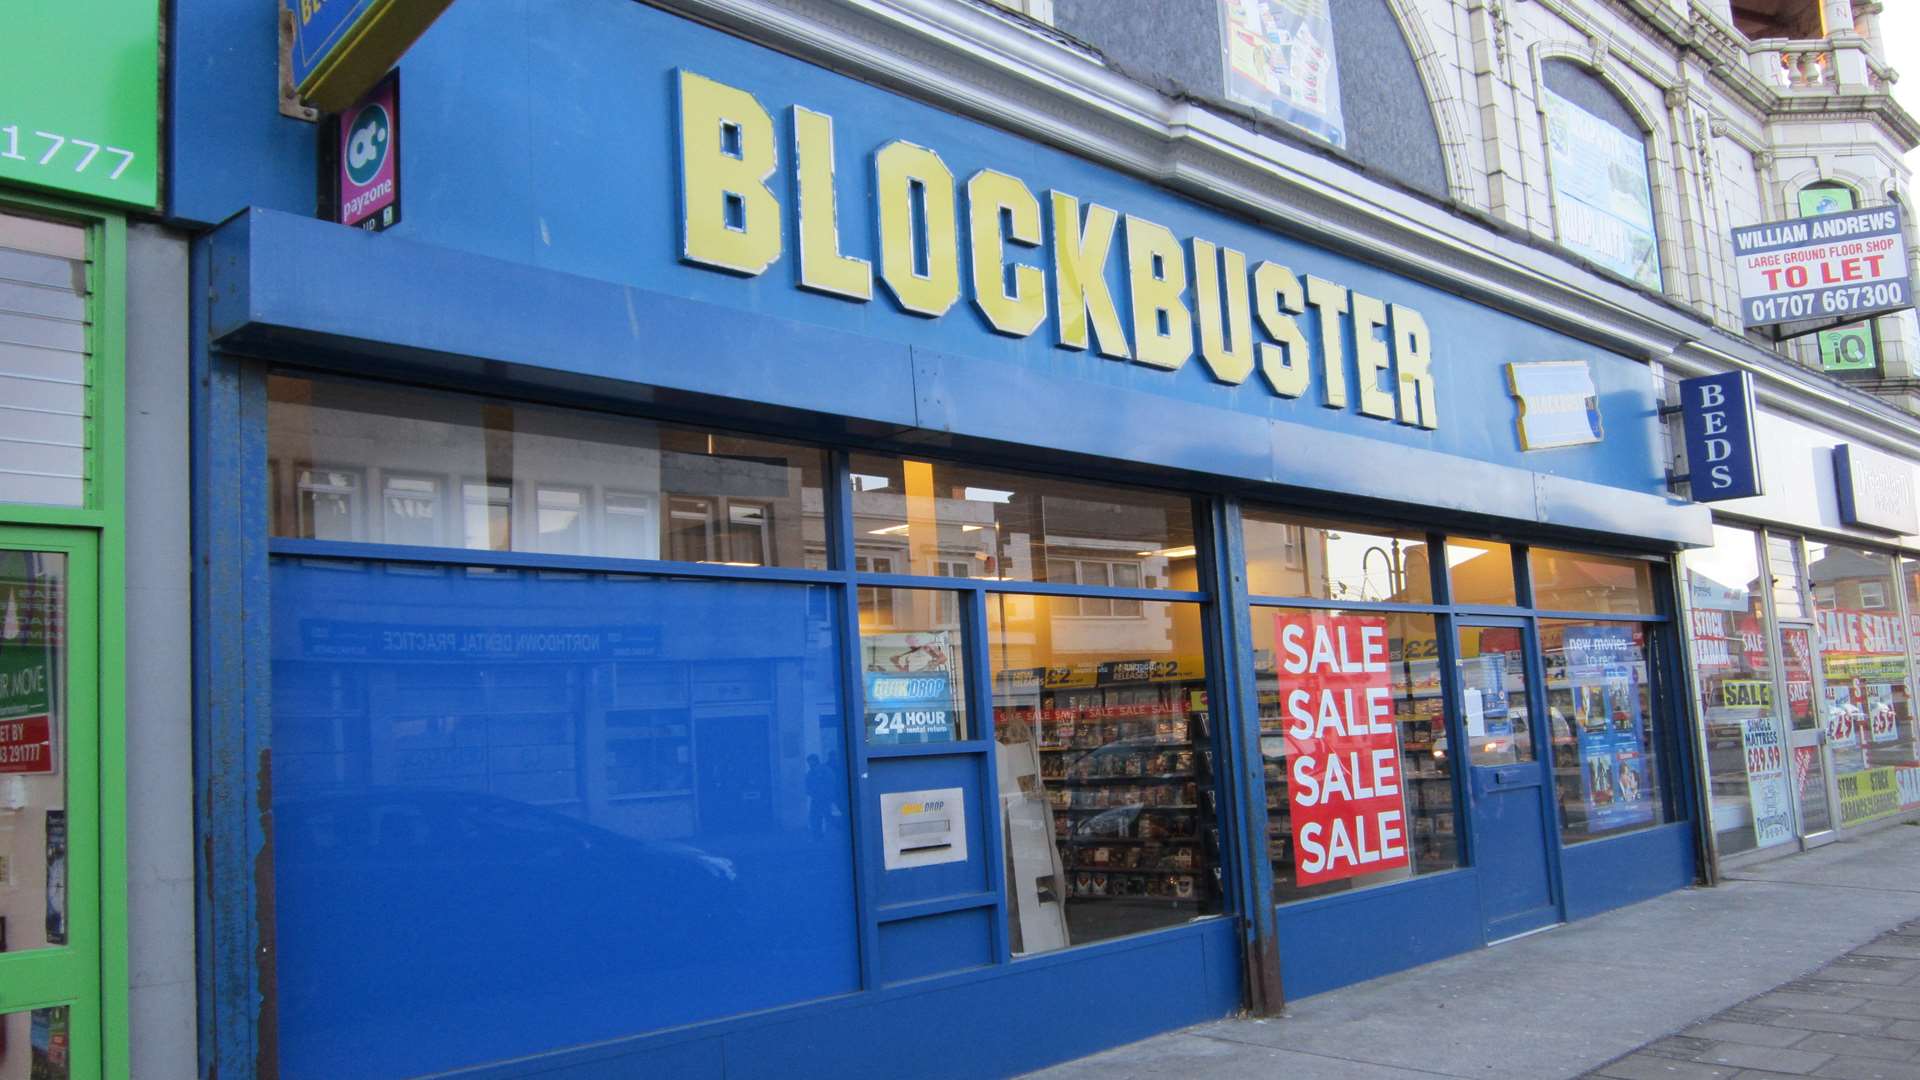 The Blockbuster branch in Margate closed in 2013